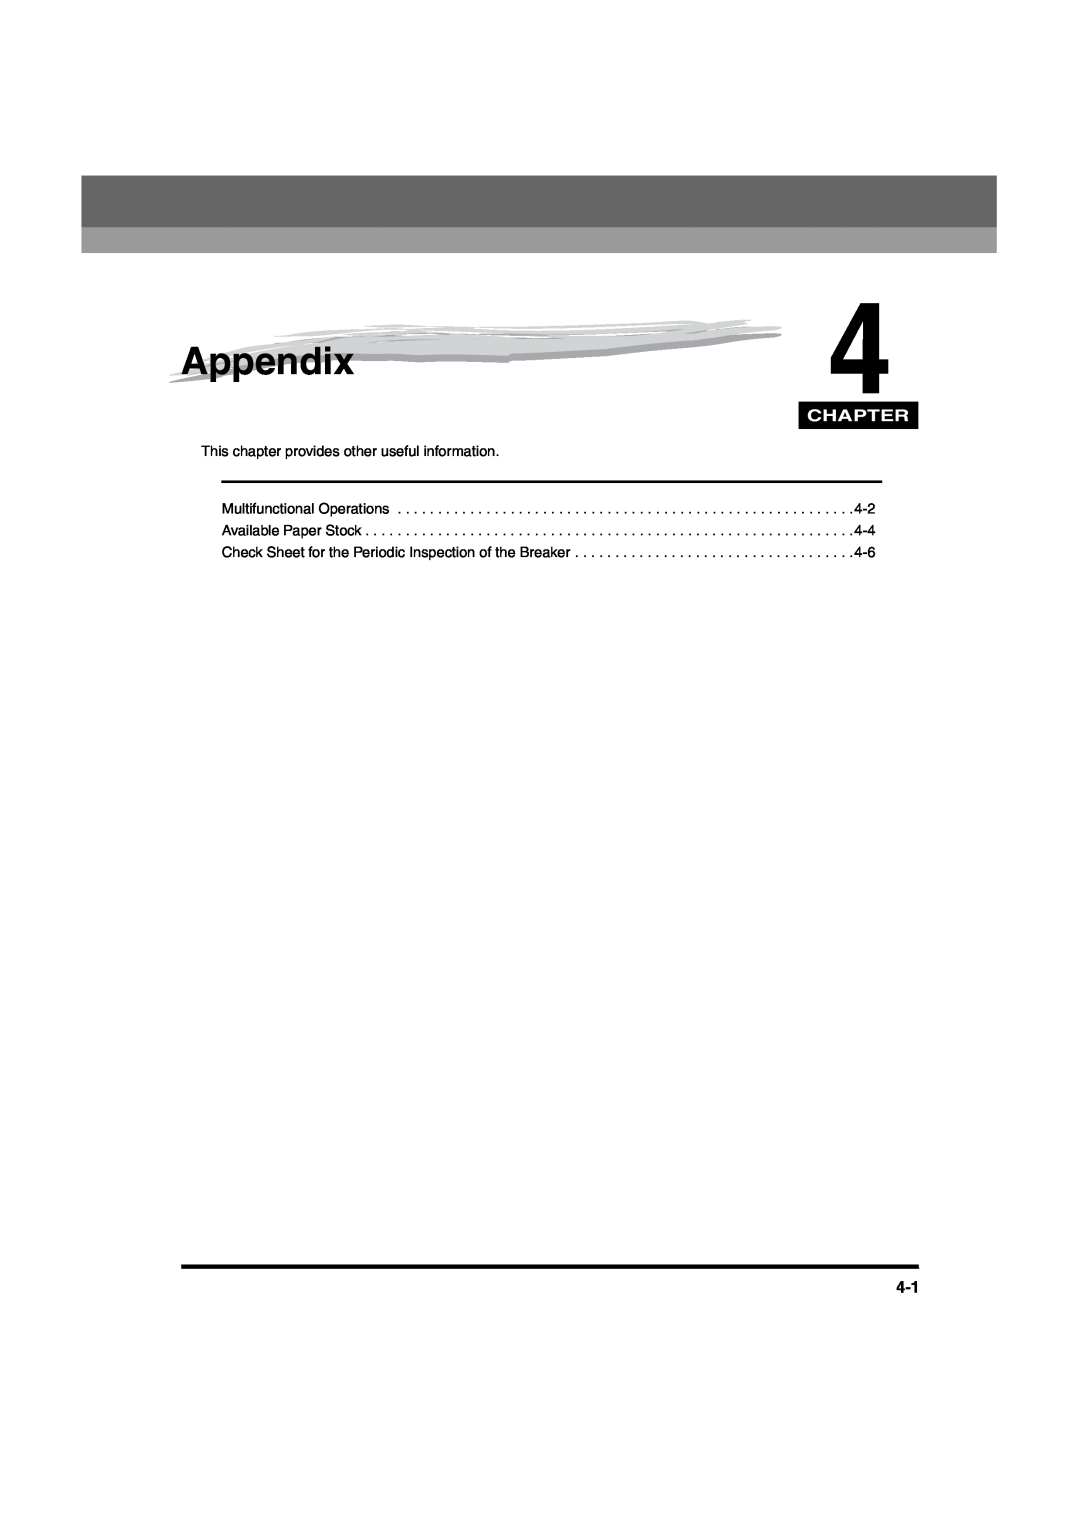 Canon iR6570 manual Appendix, Chapter, This chapter provides other useful information 